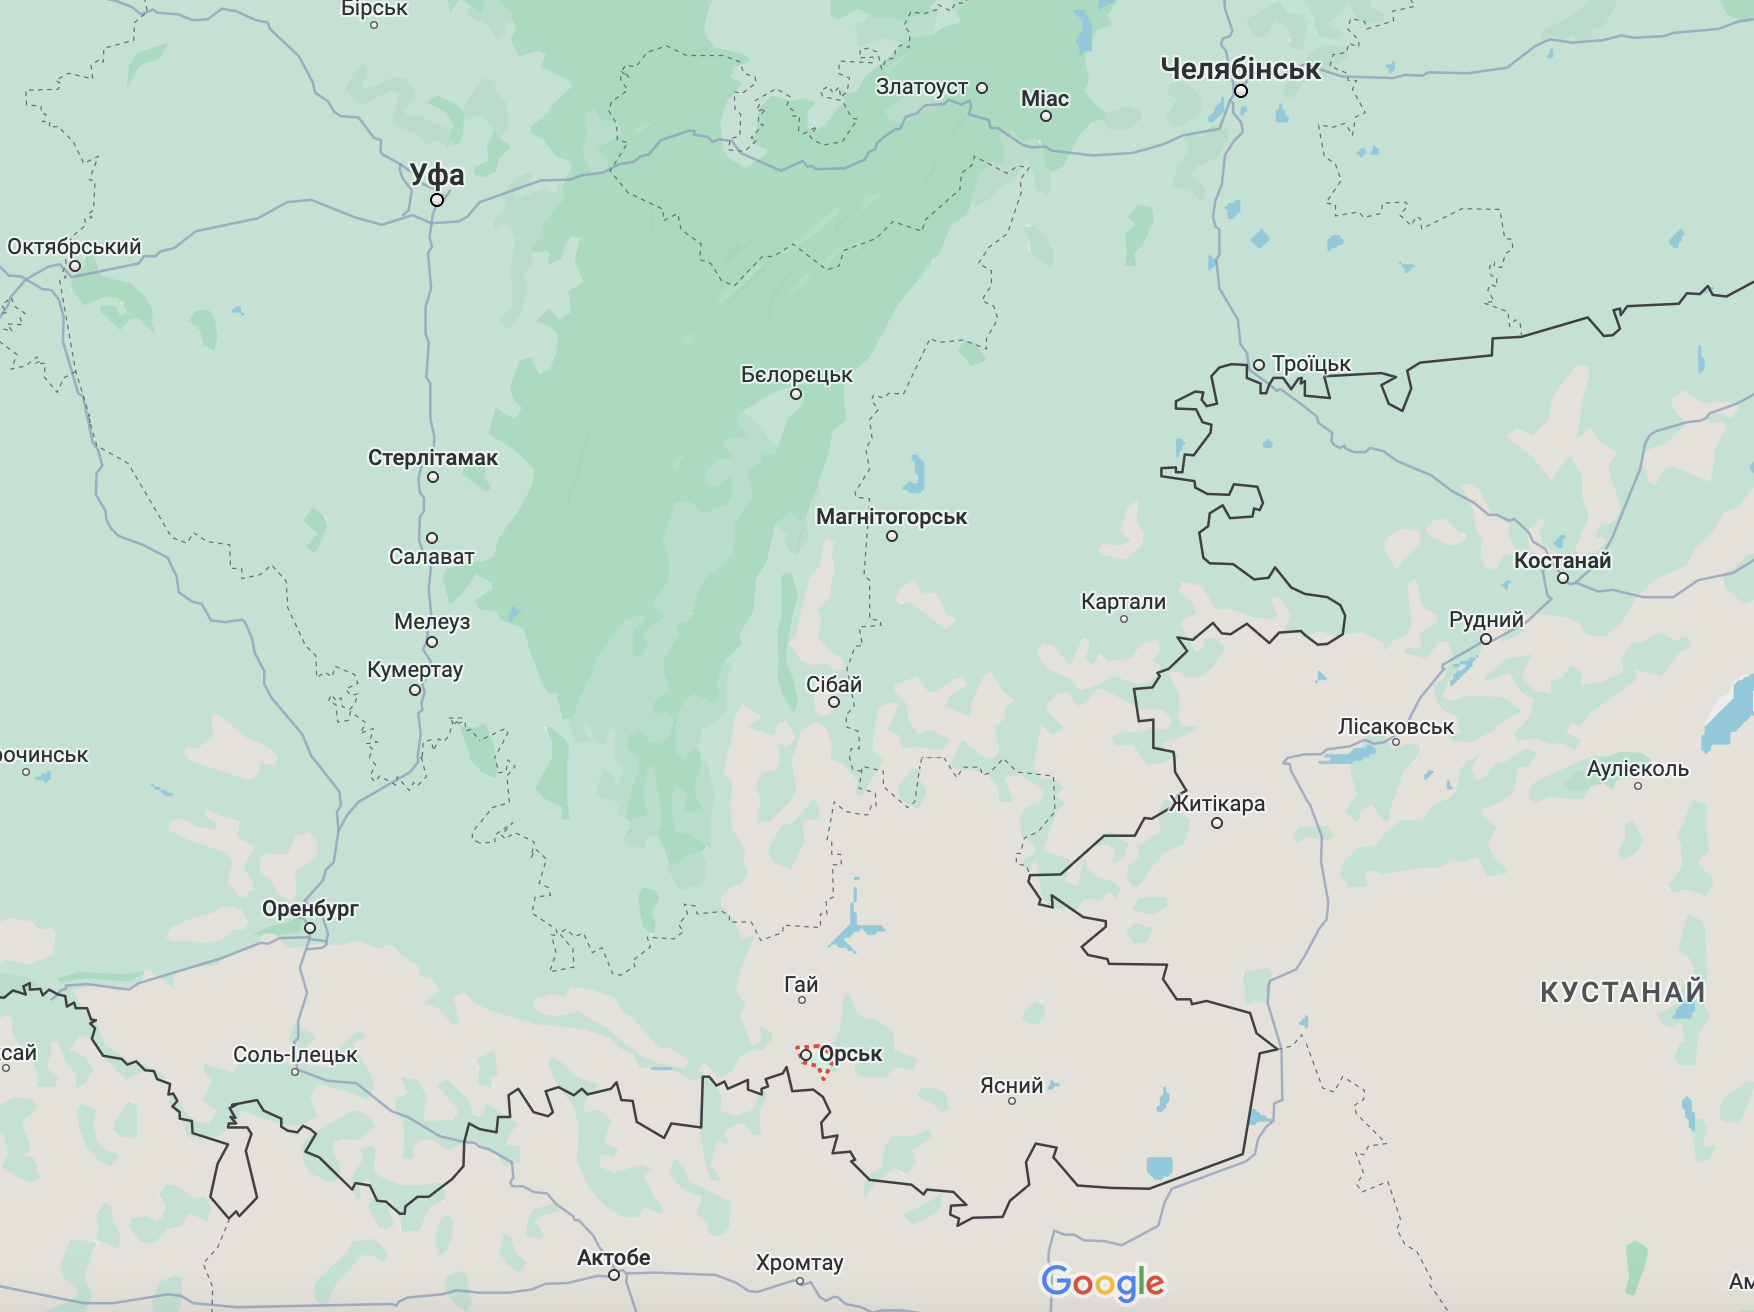 Oil refinery in Orsk, Russia, shut down due to dam breach, Russians complain of ''critical situation''